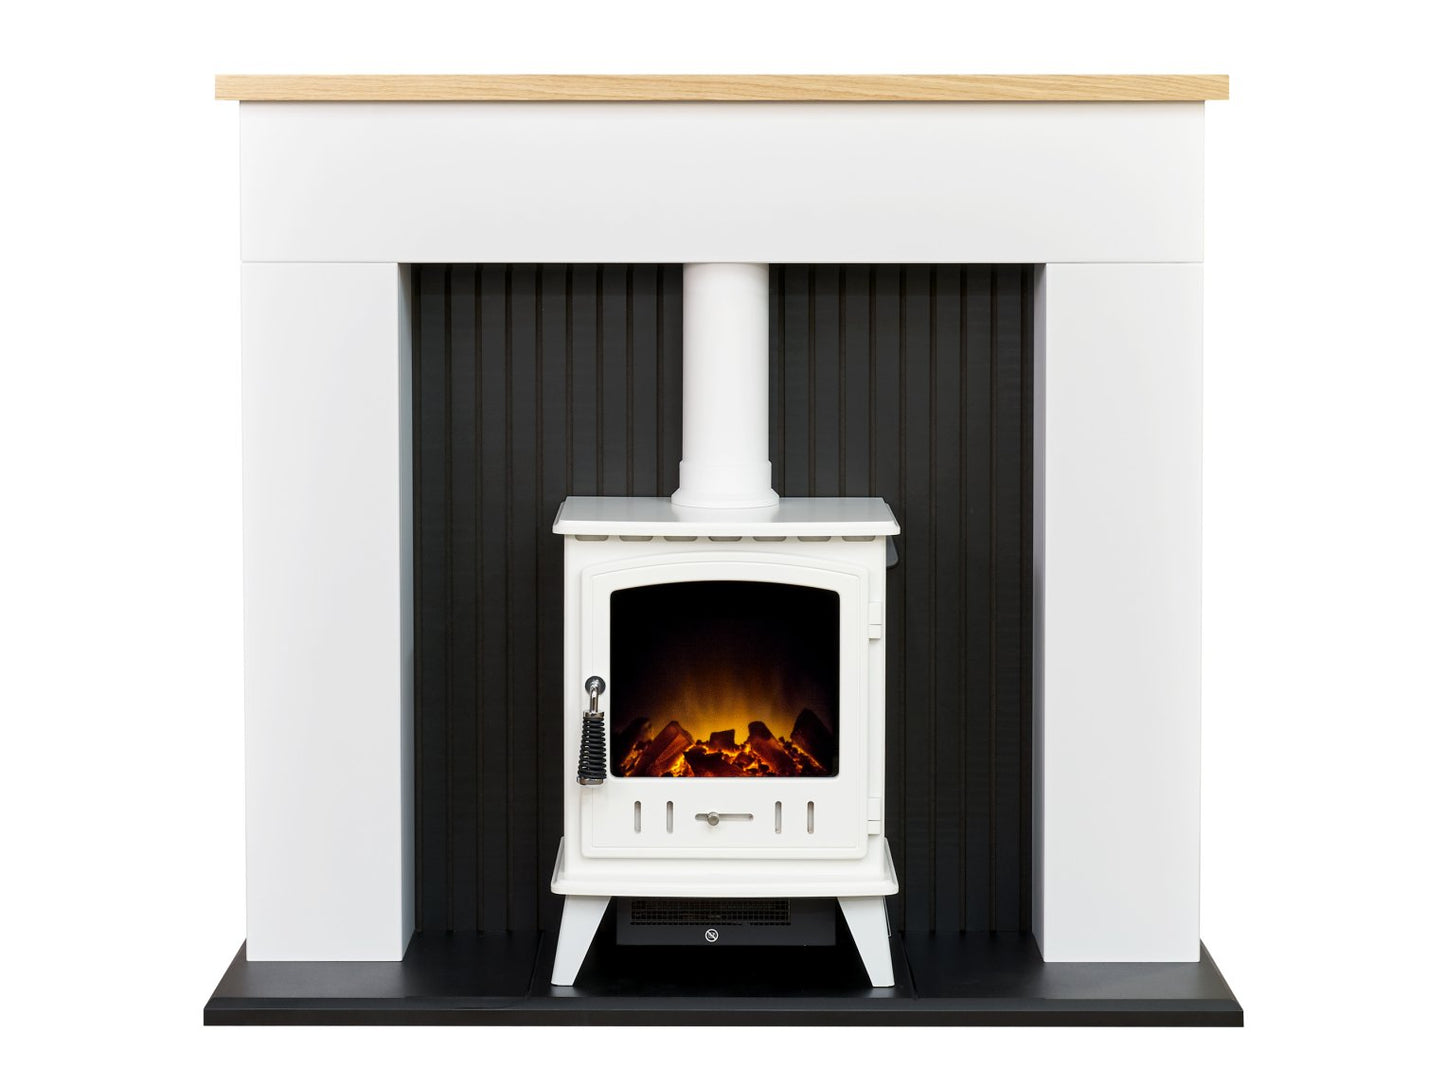 Adam Innsbruck Stove Fireplace in Pure White with Aviemore Electric Stove in White Enamel, 48 Inch